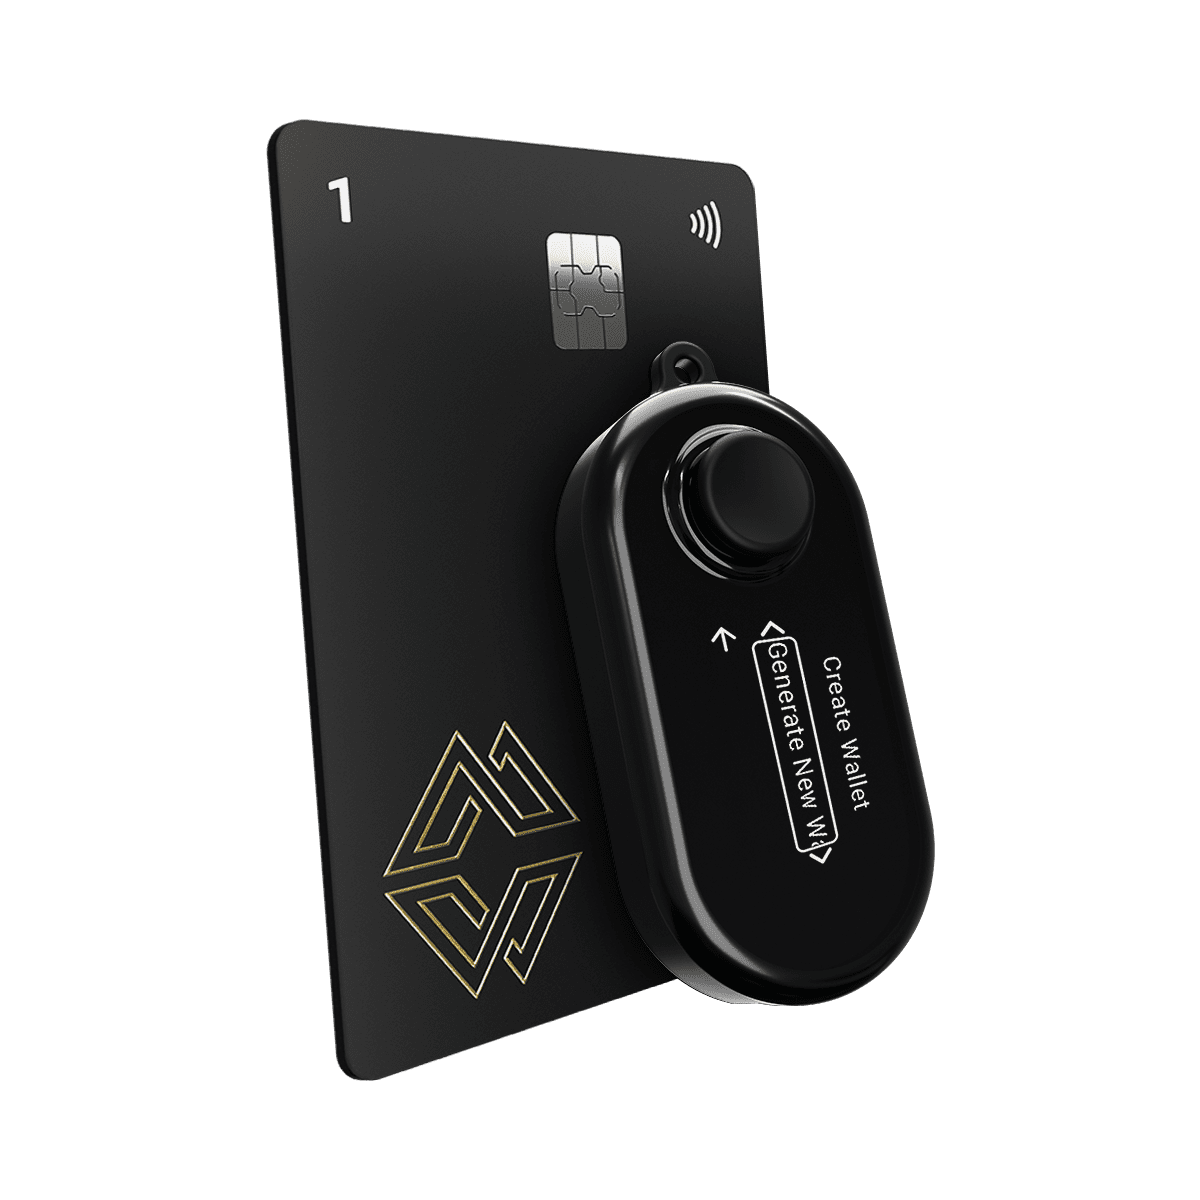 10 Best Hardware Wallets in 2022: The most comprehensive list